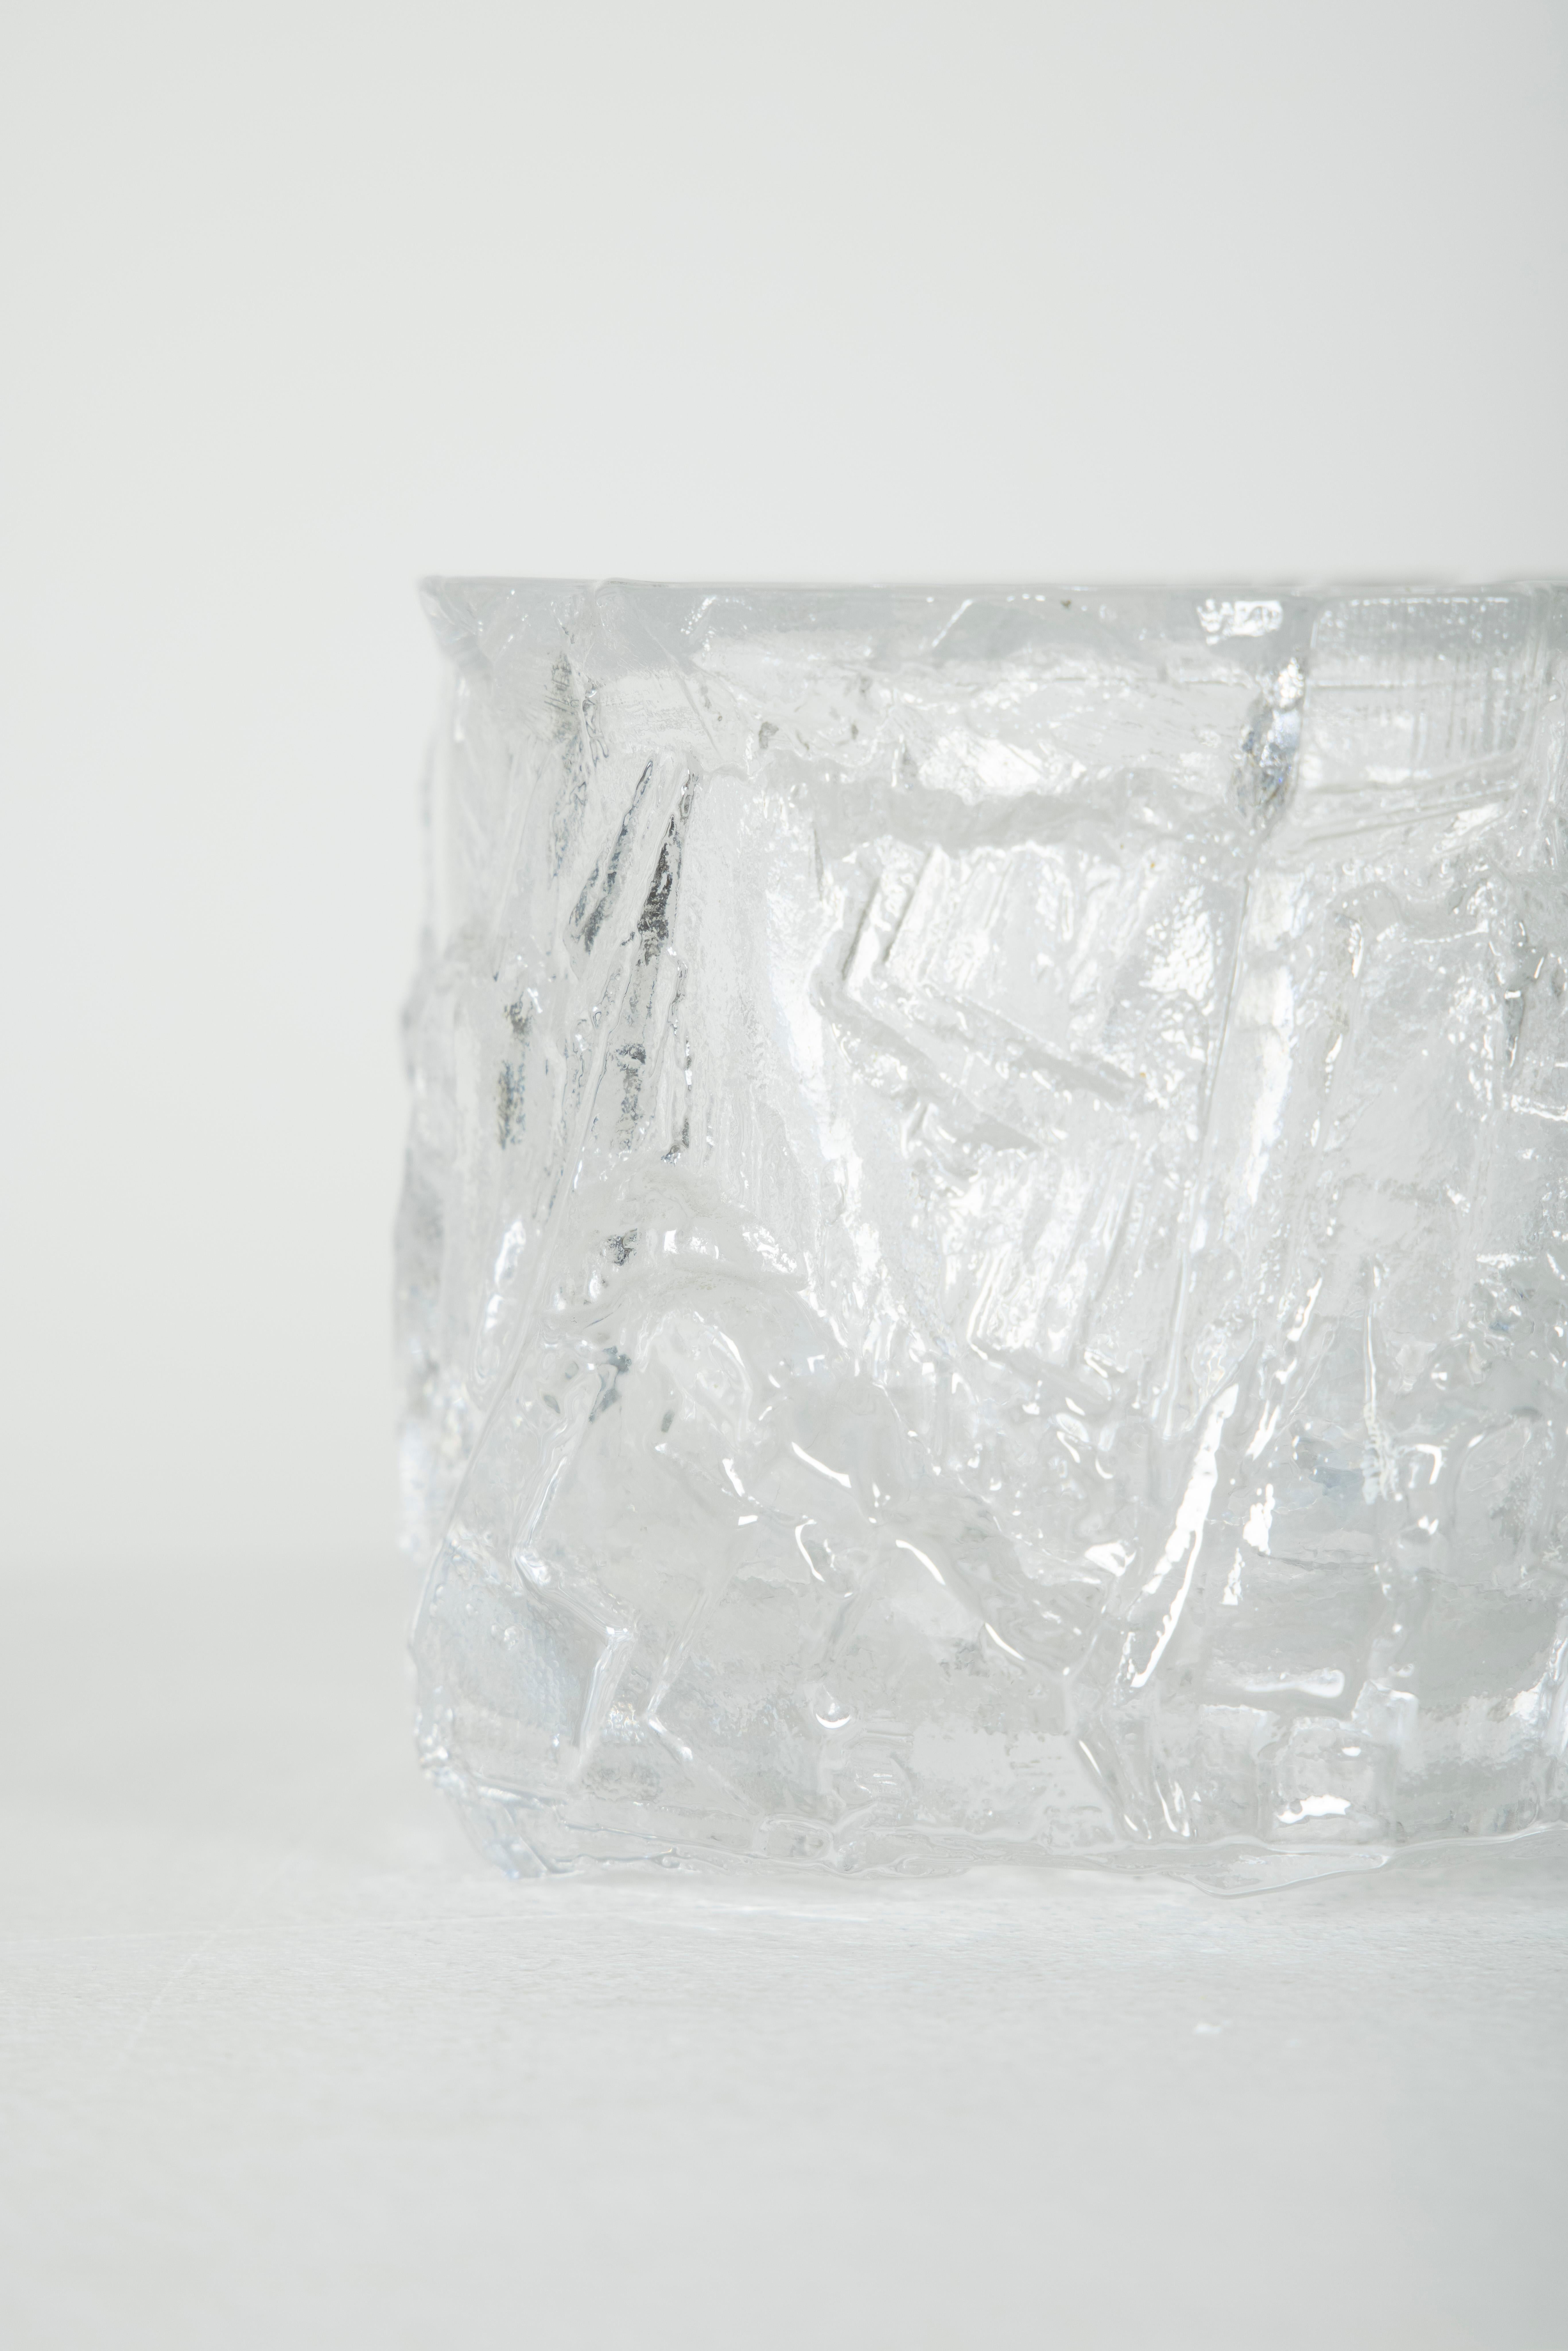 20th Century Ice Crystals Effect Trinket Bowl in Daum's Crystal, France